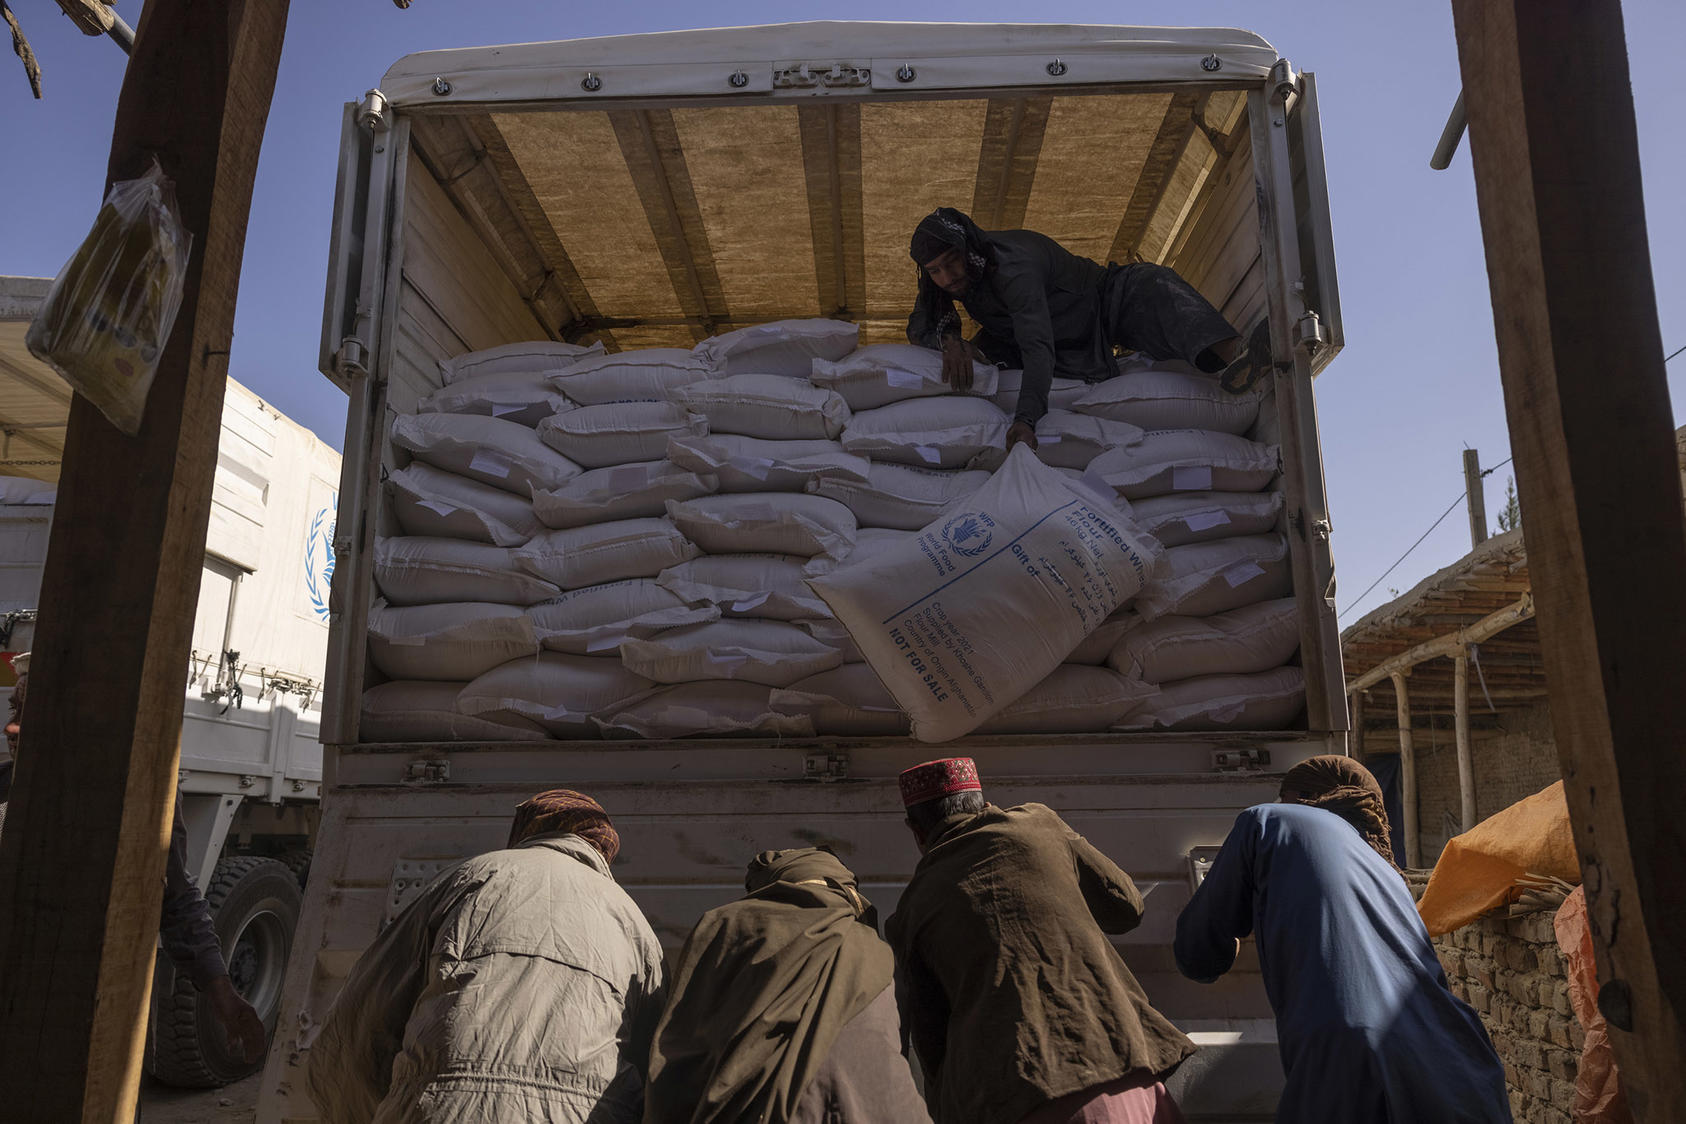 Sacks of flour from a World Food Program convoy are unloaded in Afghanistan. Oct. 27, 2021. (Victor J. Blue/The New York Times)